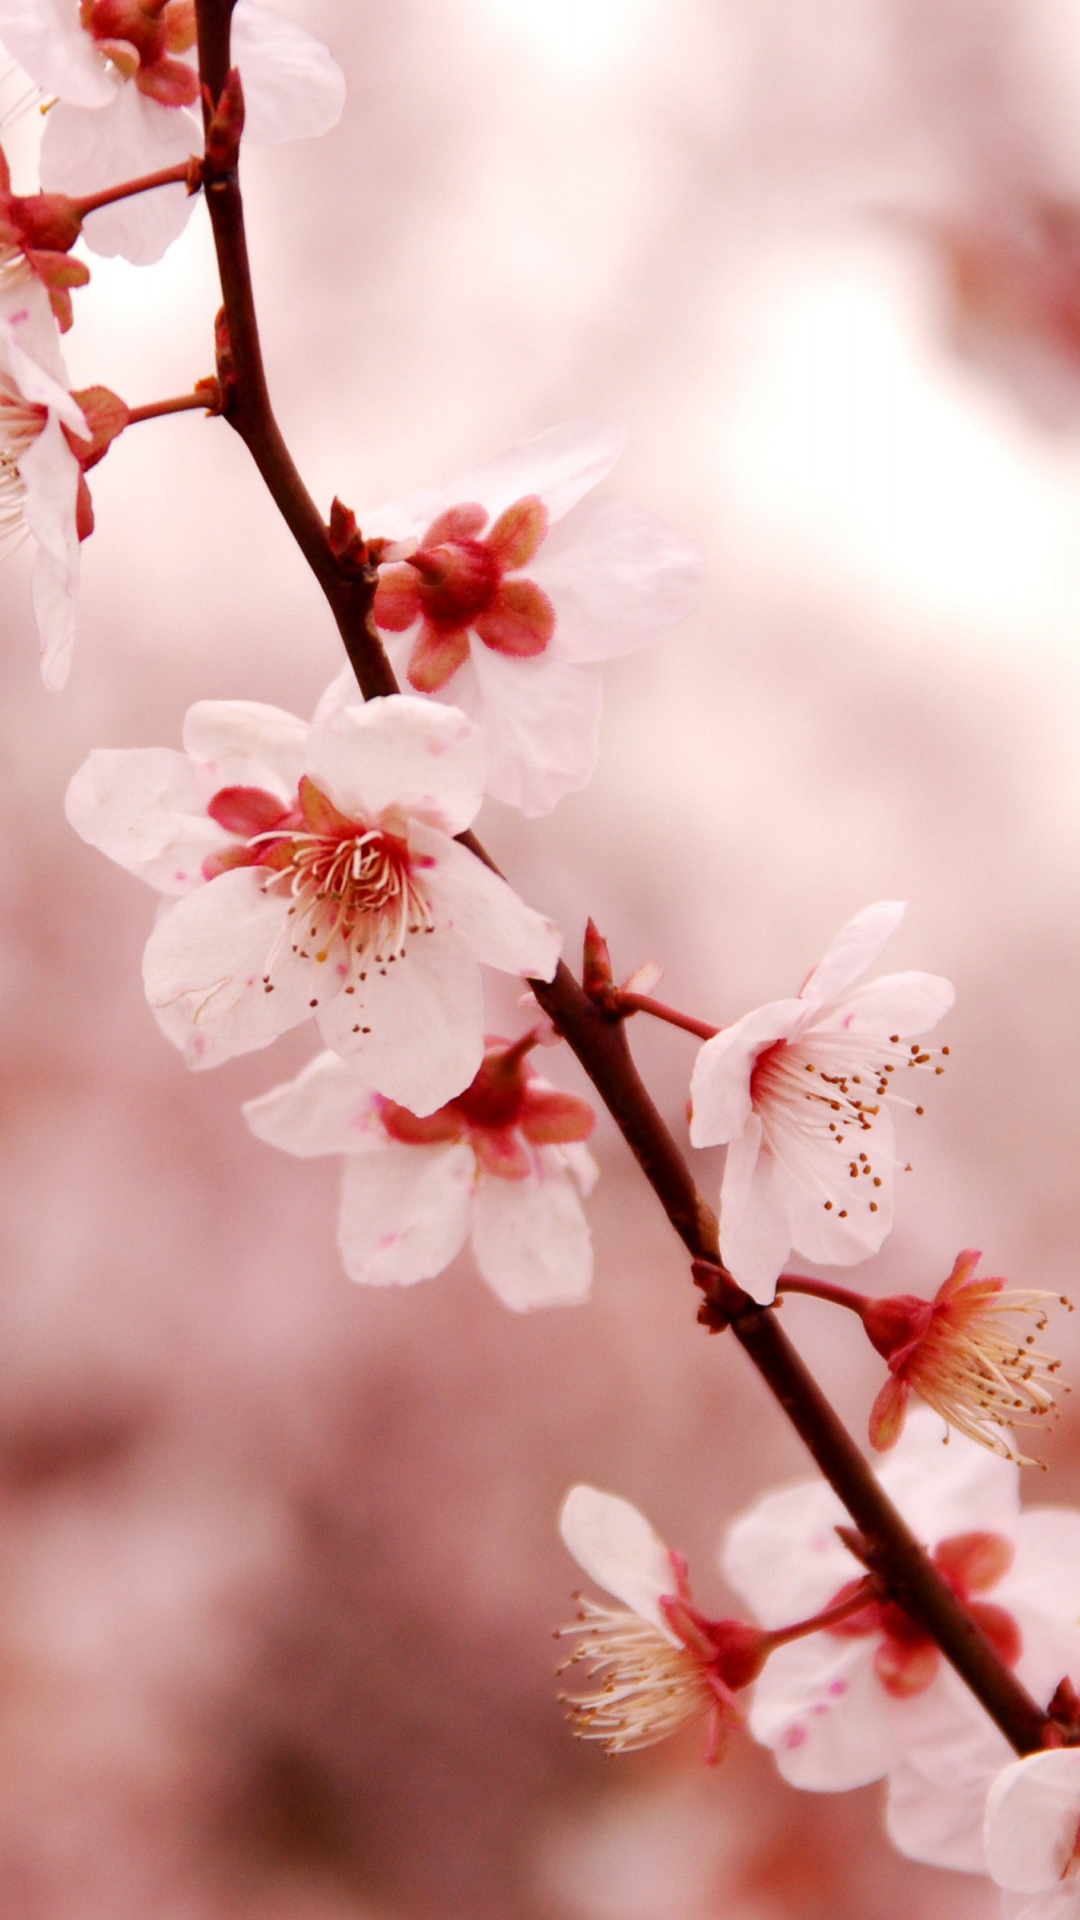 Cherry Blossom Iphone Wallpaper Download Free - Iphone Wallpaper Cherry Blossom - HD Wallpaper 